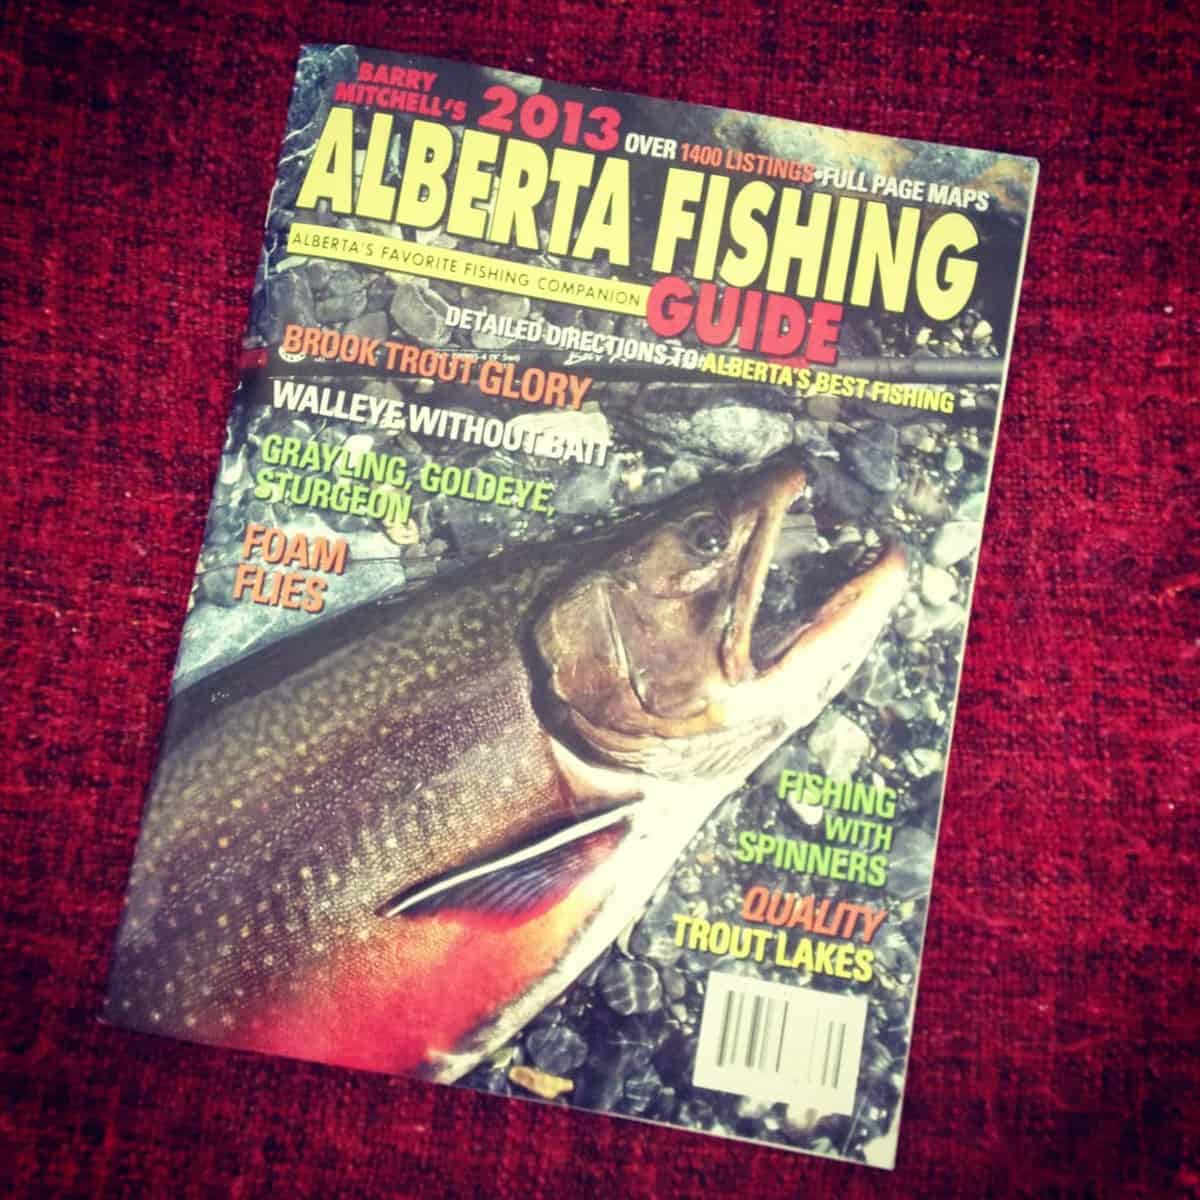 a copy of the 2013 Alberta Fishing Guide booklet